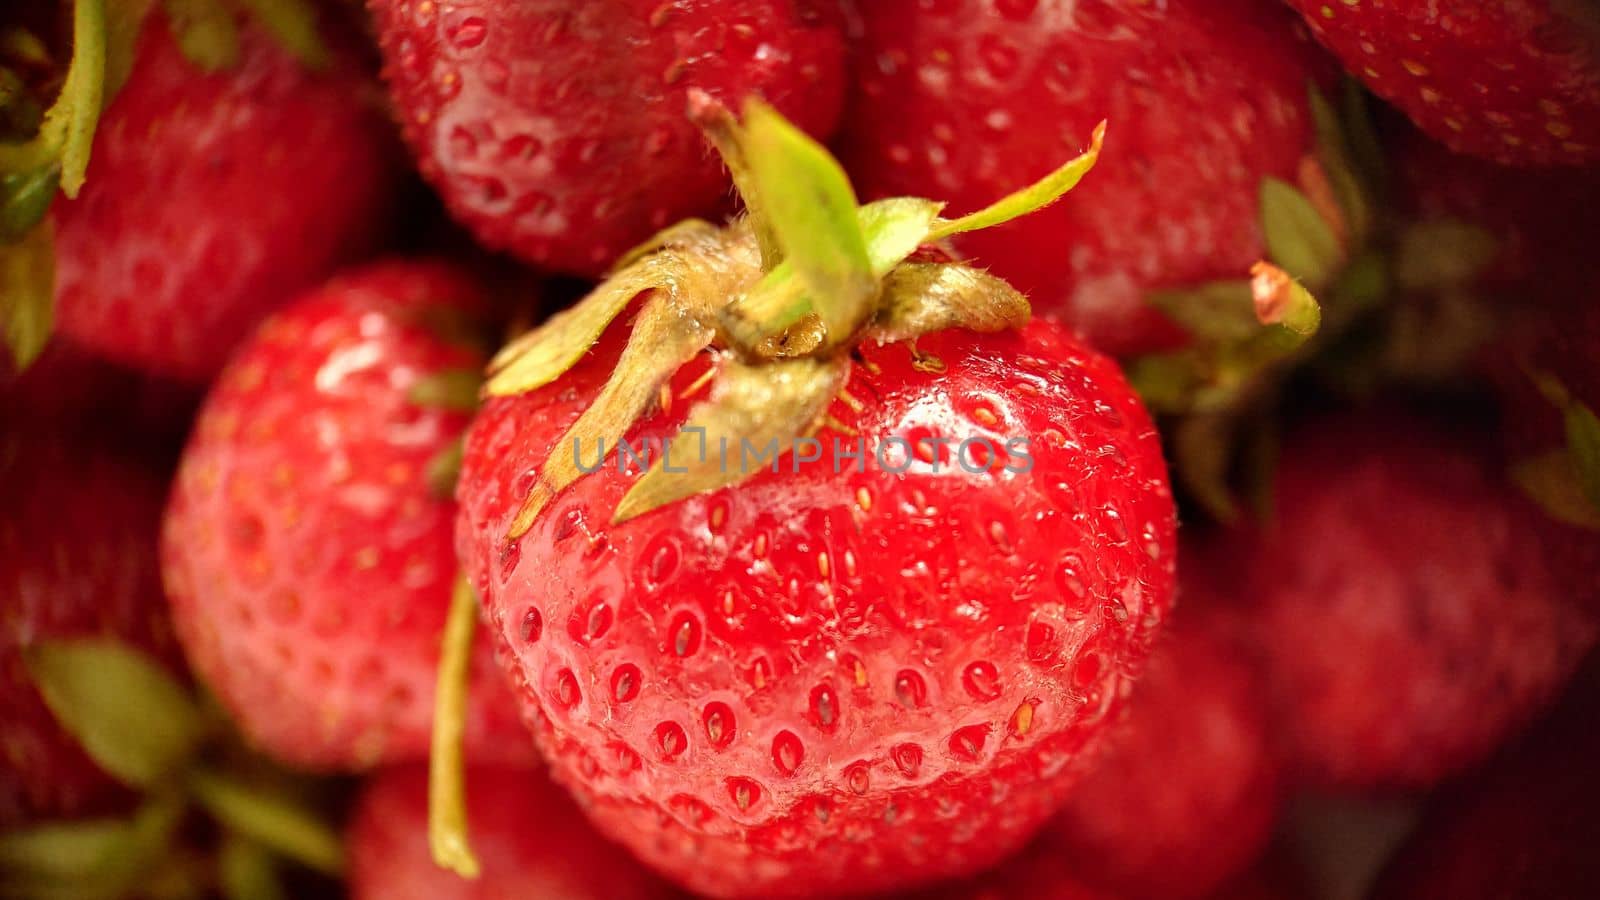 A handful of rich-colored red strawberries close-up by Mastak80